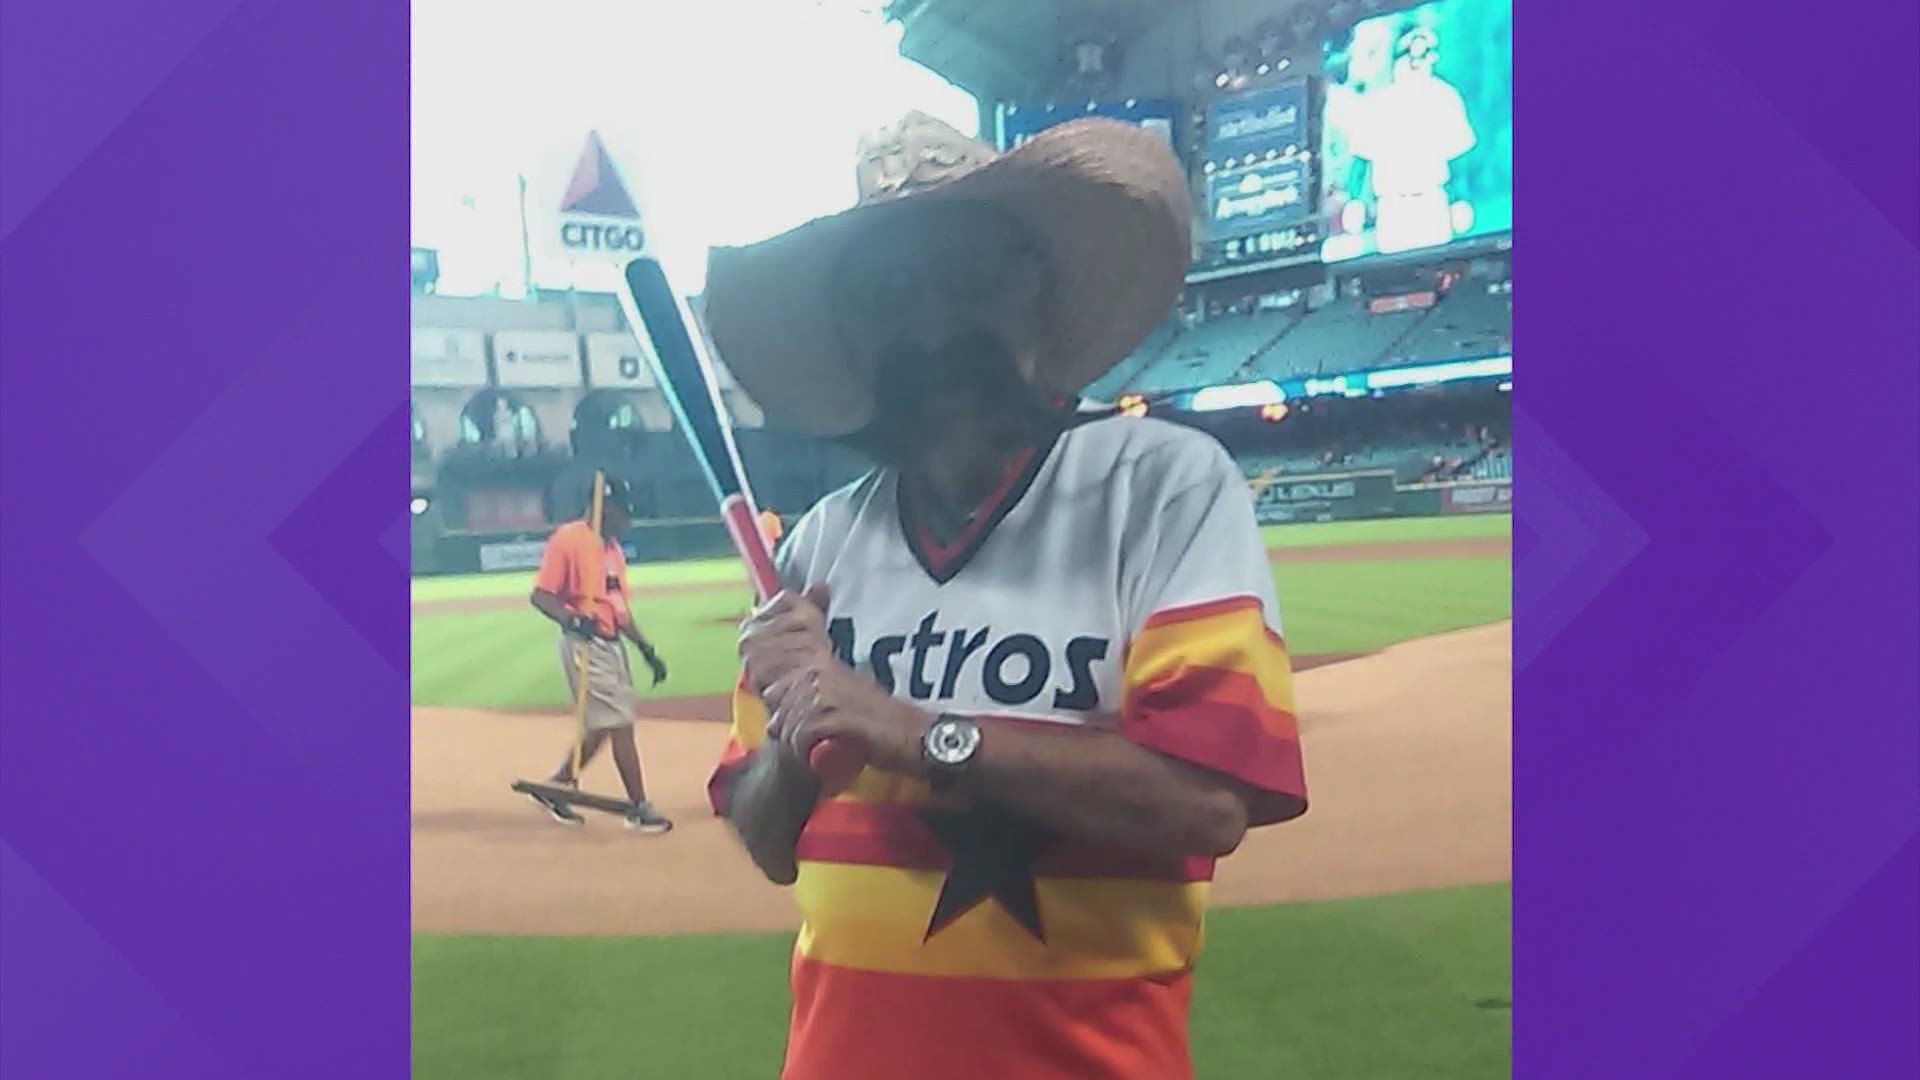 Houston Astros fans are mourning the loss of two super fans that have died due to COVID. They were known for their big smiles and even bigger personalities.